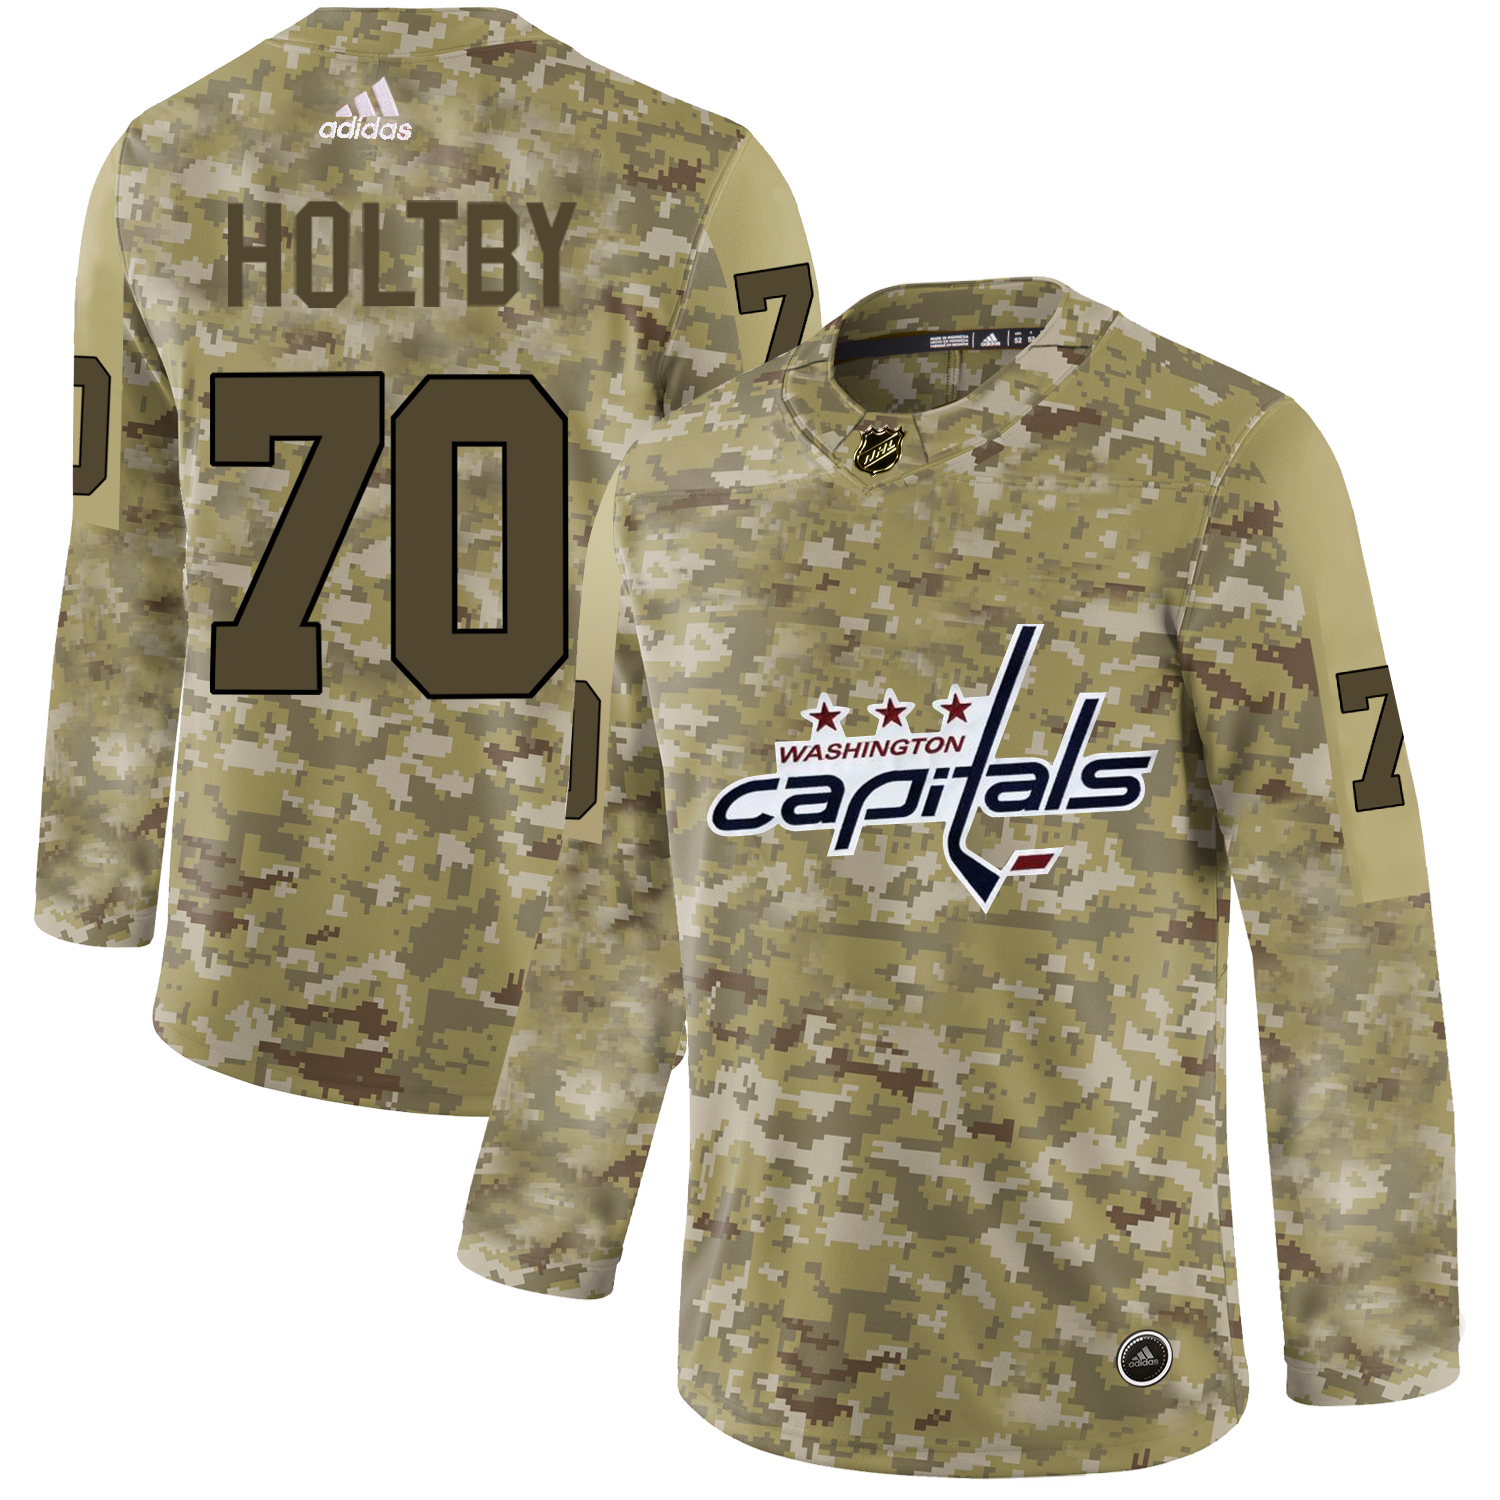 Adidas Capitals #70 Braden Holtby Camo Authentic Stitched NHL Jersey